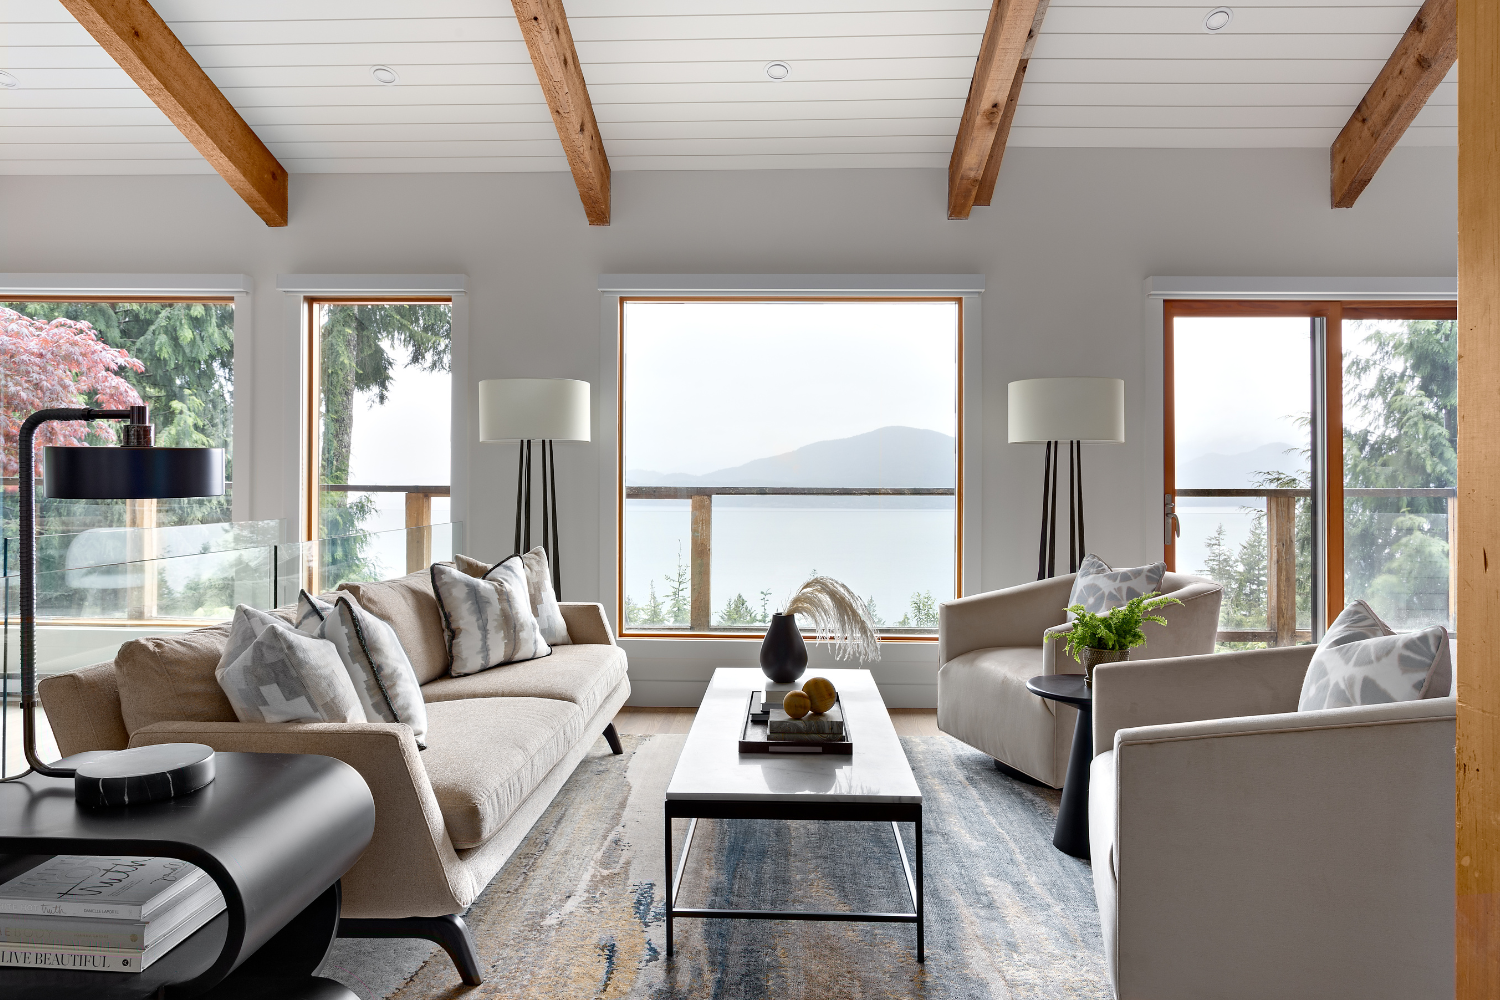 simply-home-decorating-blueridge-bc-ca-why-you-should-renovate-your-mid-century-home-living-room-with-bay-views-large-windows-nature-inspired-home-fresh-interior-design